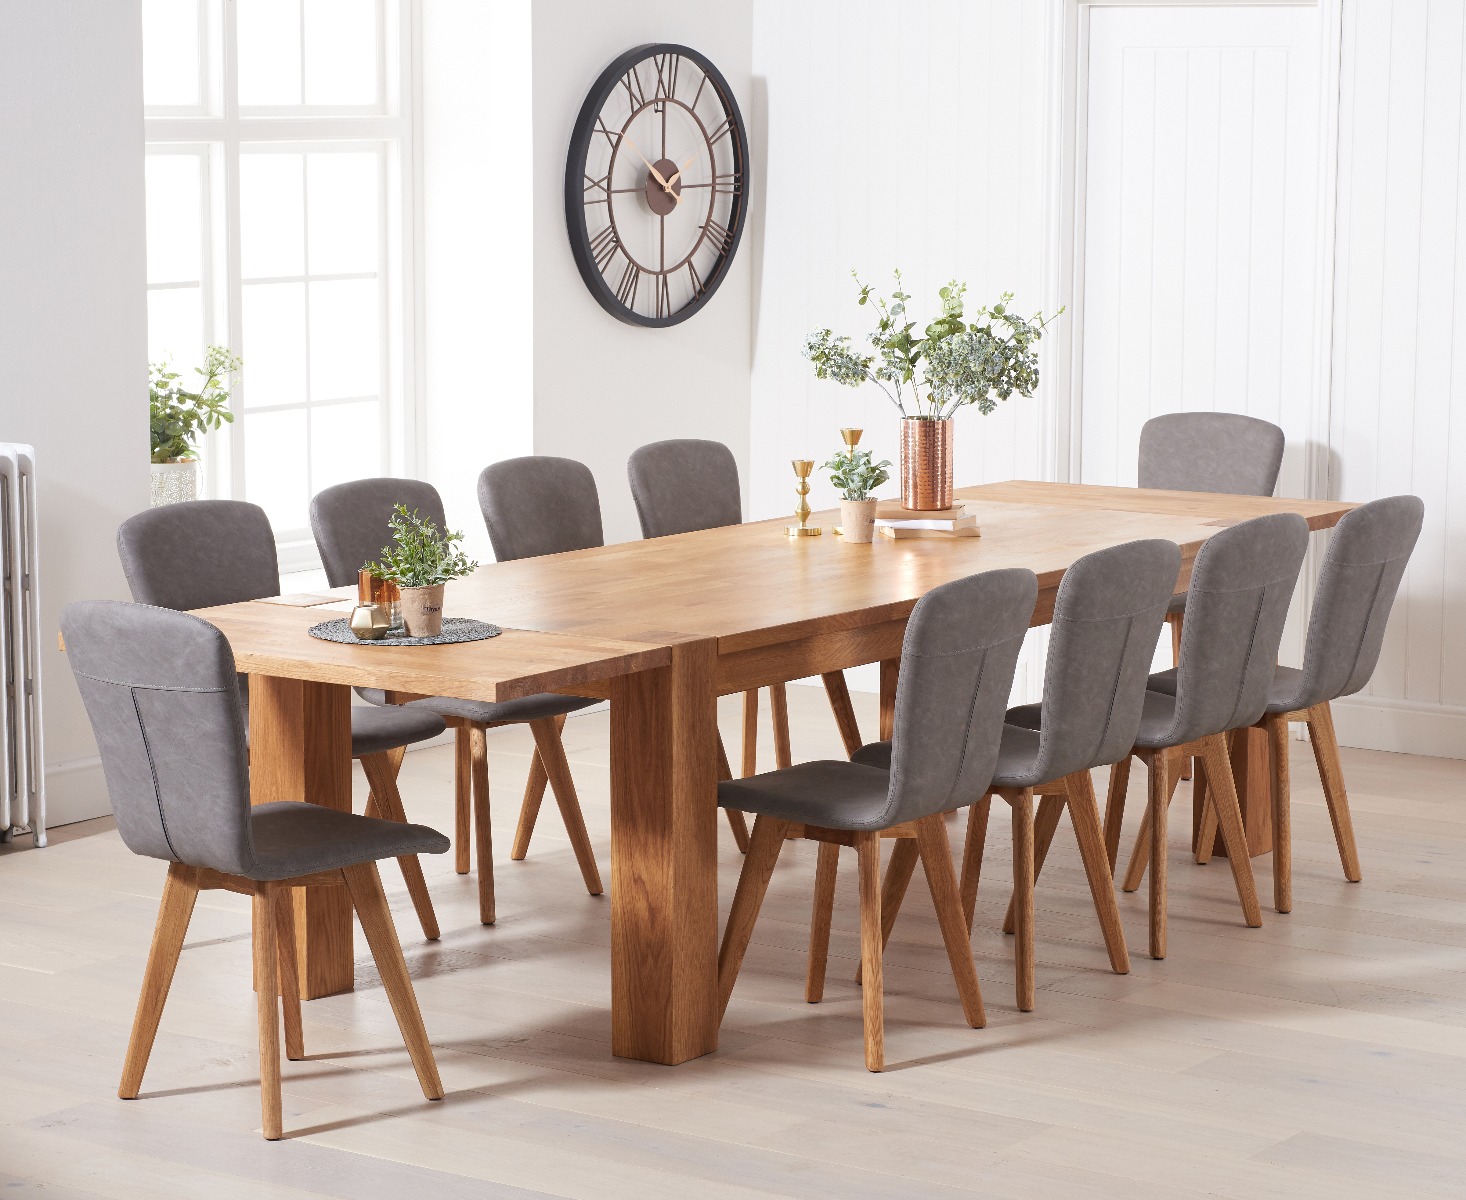 Extending Sheringham 240cm Solid Oak Table With 10 Grey Ruben Faux Leather Chairs